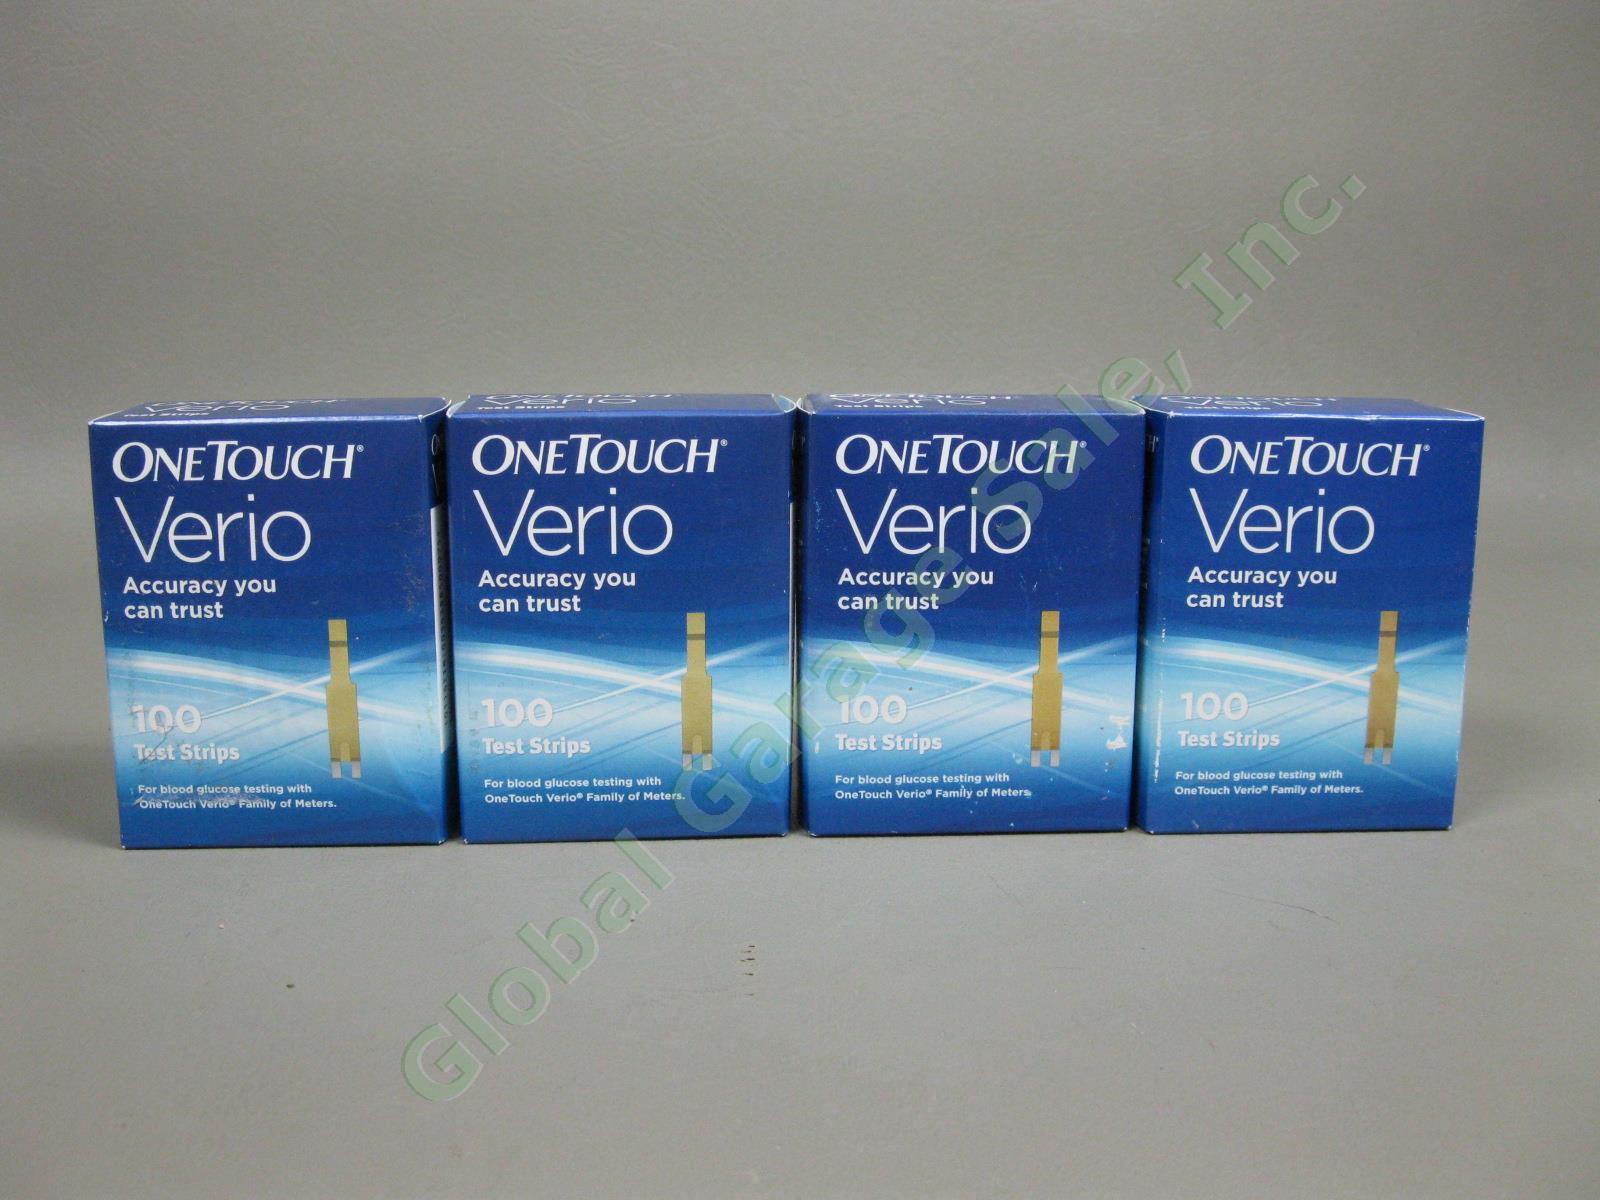 1100 NEW OneTouch Verio Diabetic Glucose Test Strips Sealed Lot Exp 2018-2019 NR 8